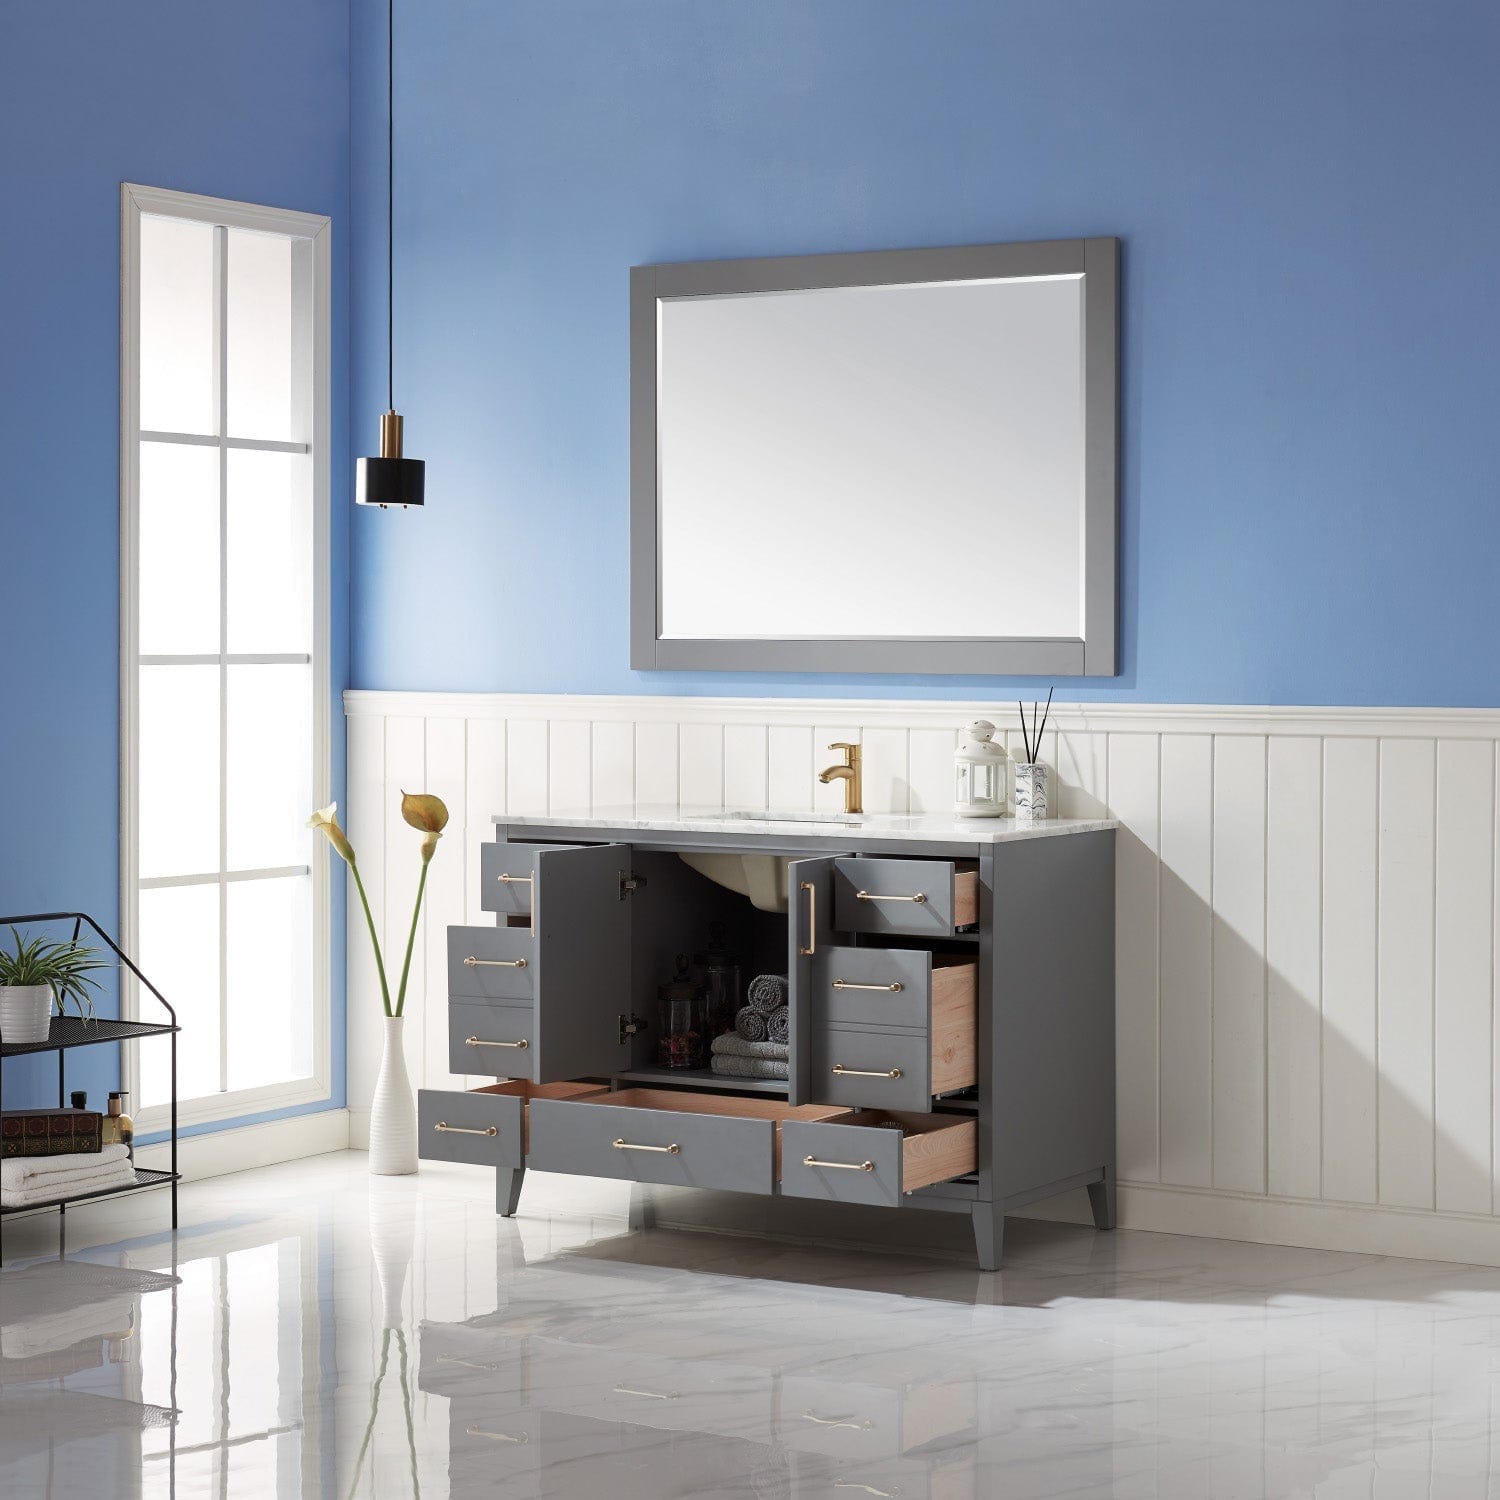 Altair Sutton 48" Single Bathroom Vanity Set in Gray and Carrara White Marble Countertop with Mirror 541048-GR-CA - Molaix631112971874Vanity541048-GR-CA